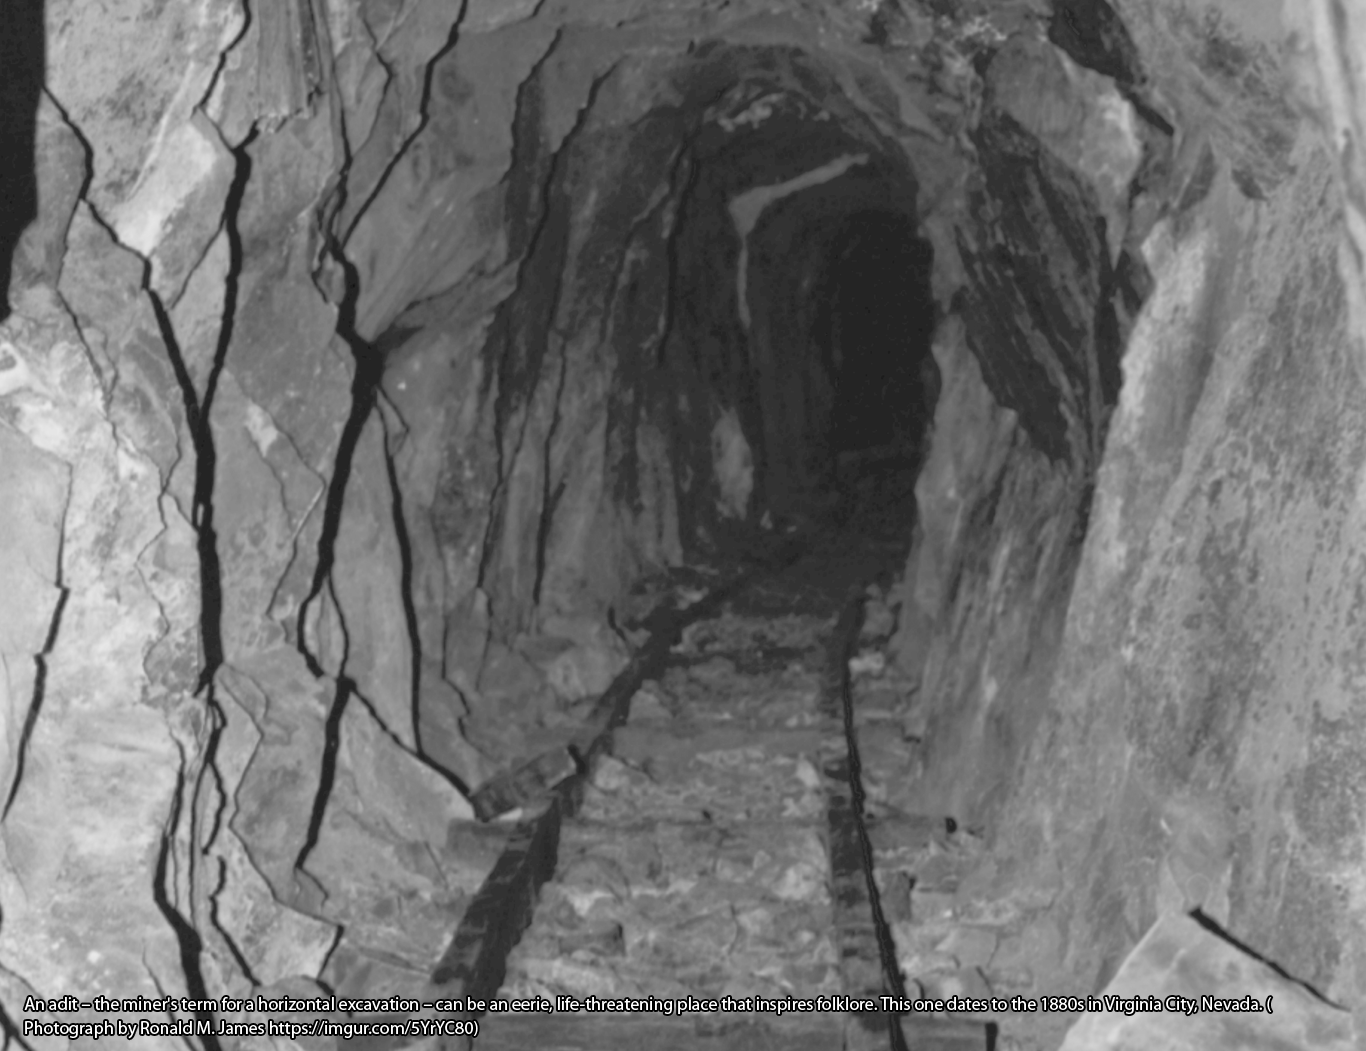 An adit – the miner's term for a horizontal excavation – can be an eerie, life-threatening place that inspires folklore. This one dates to the 1880s in Virginia City, Nevada. (Photograph by Ronald M. James https://imgur.com/5YrYC80)